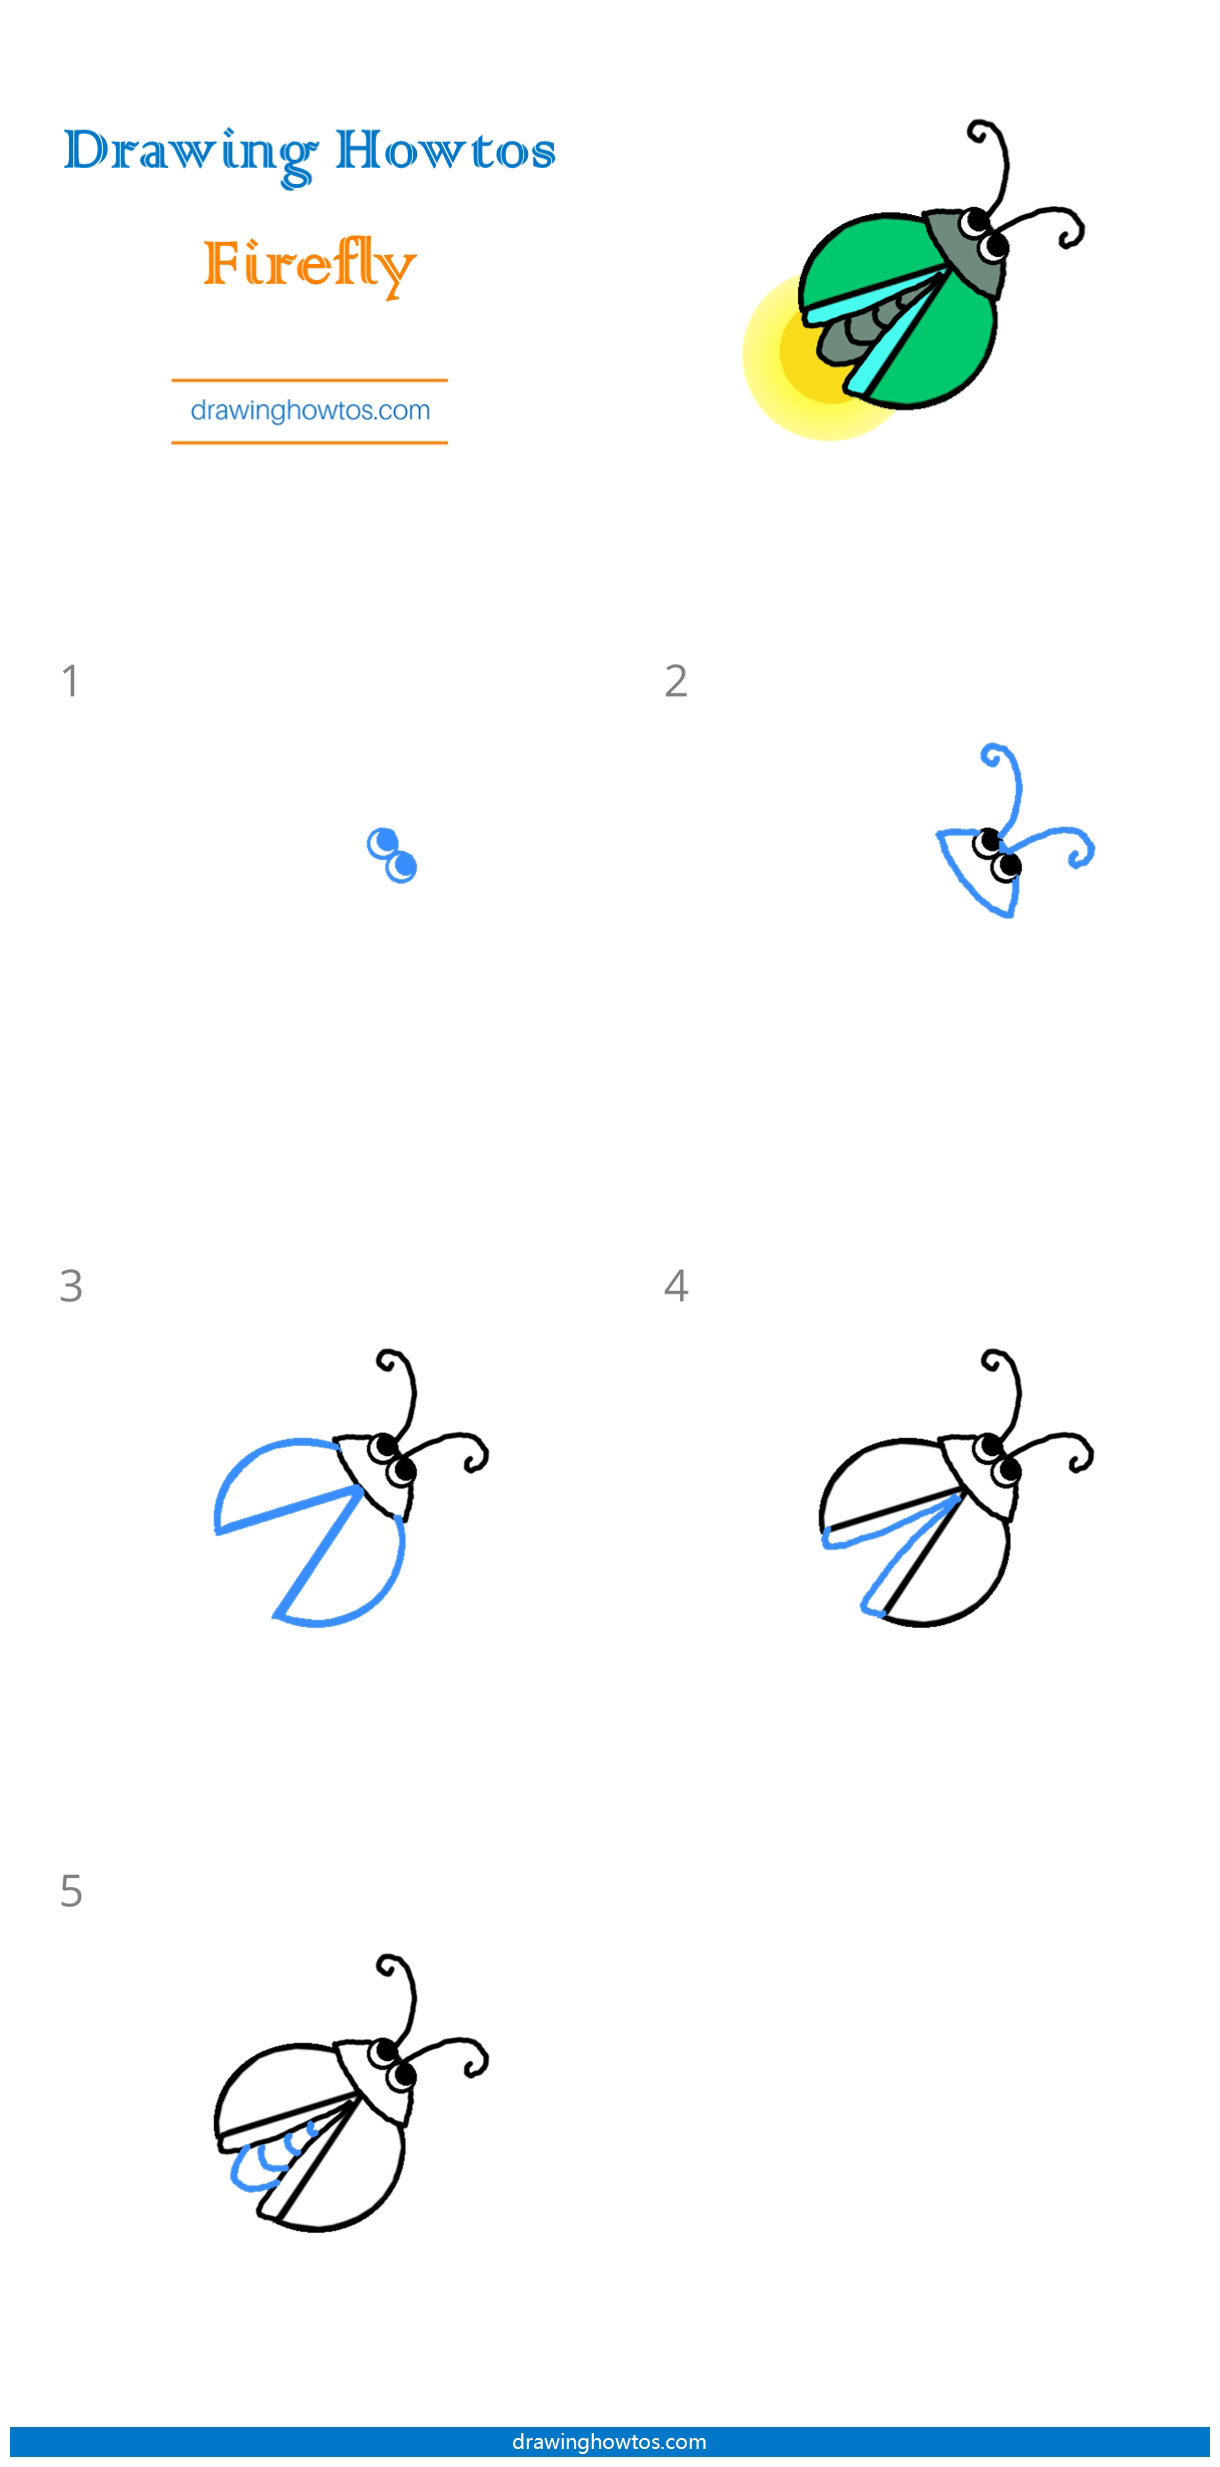 How to Draw a Firefly - Step by Step Easy Drawing Guides - Drawing Howtos